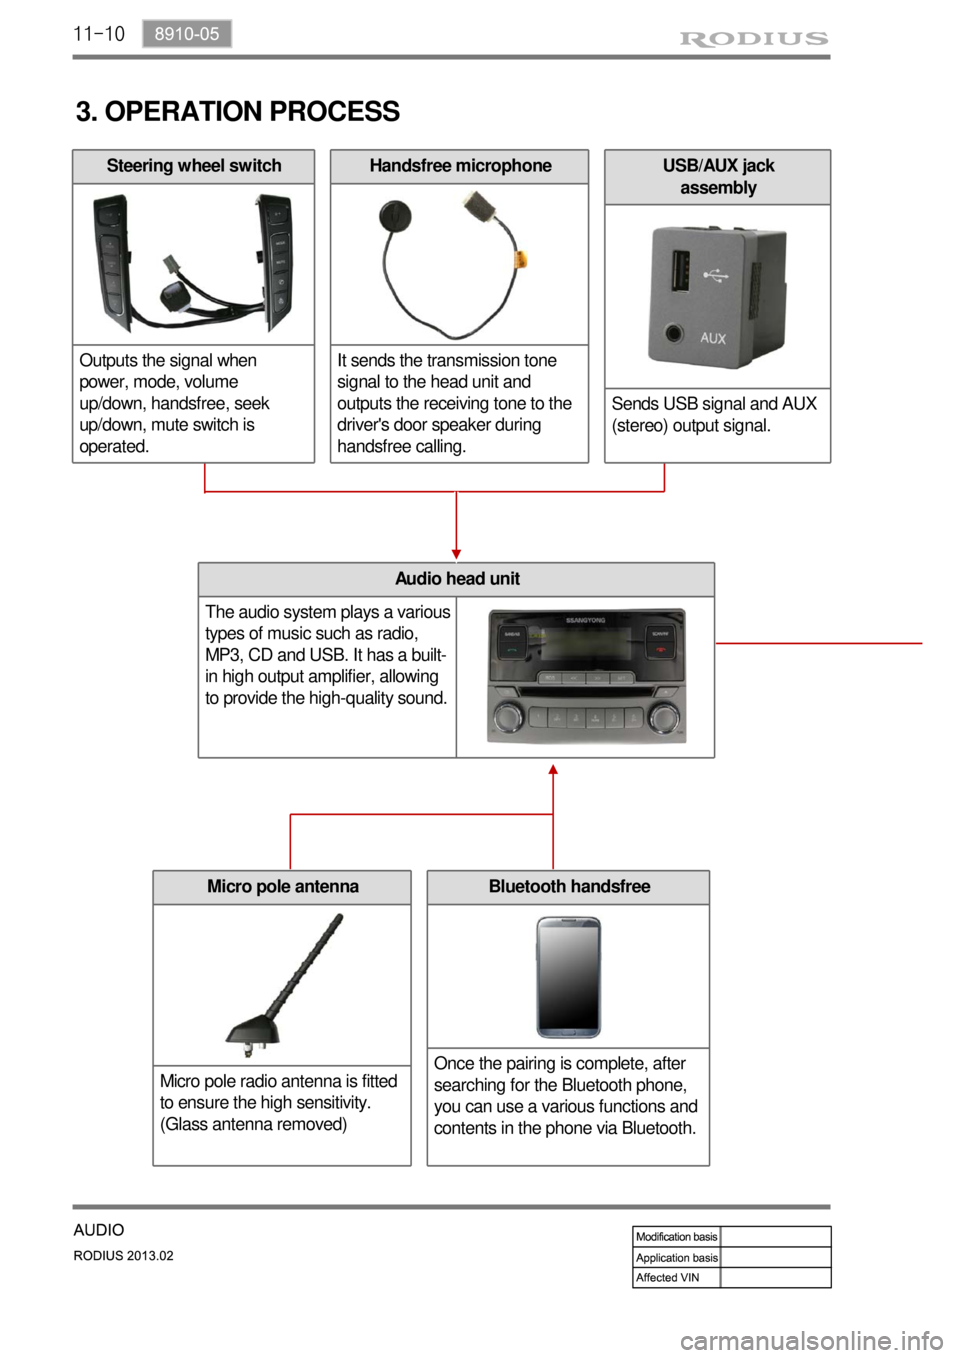 SSANGYONG TURISMO 2013  Service Manual 11-10
USB/AUX jack 
assembly
Sends USB signal and AUX 
(stereo) output signal.Handsfree microphone
It sends the transmission tone 
signal to the head unit and 
outputs the receiving tone to the 
drive